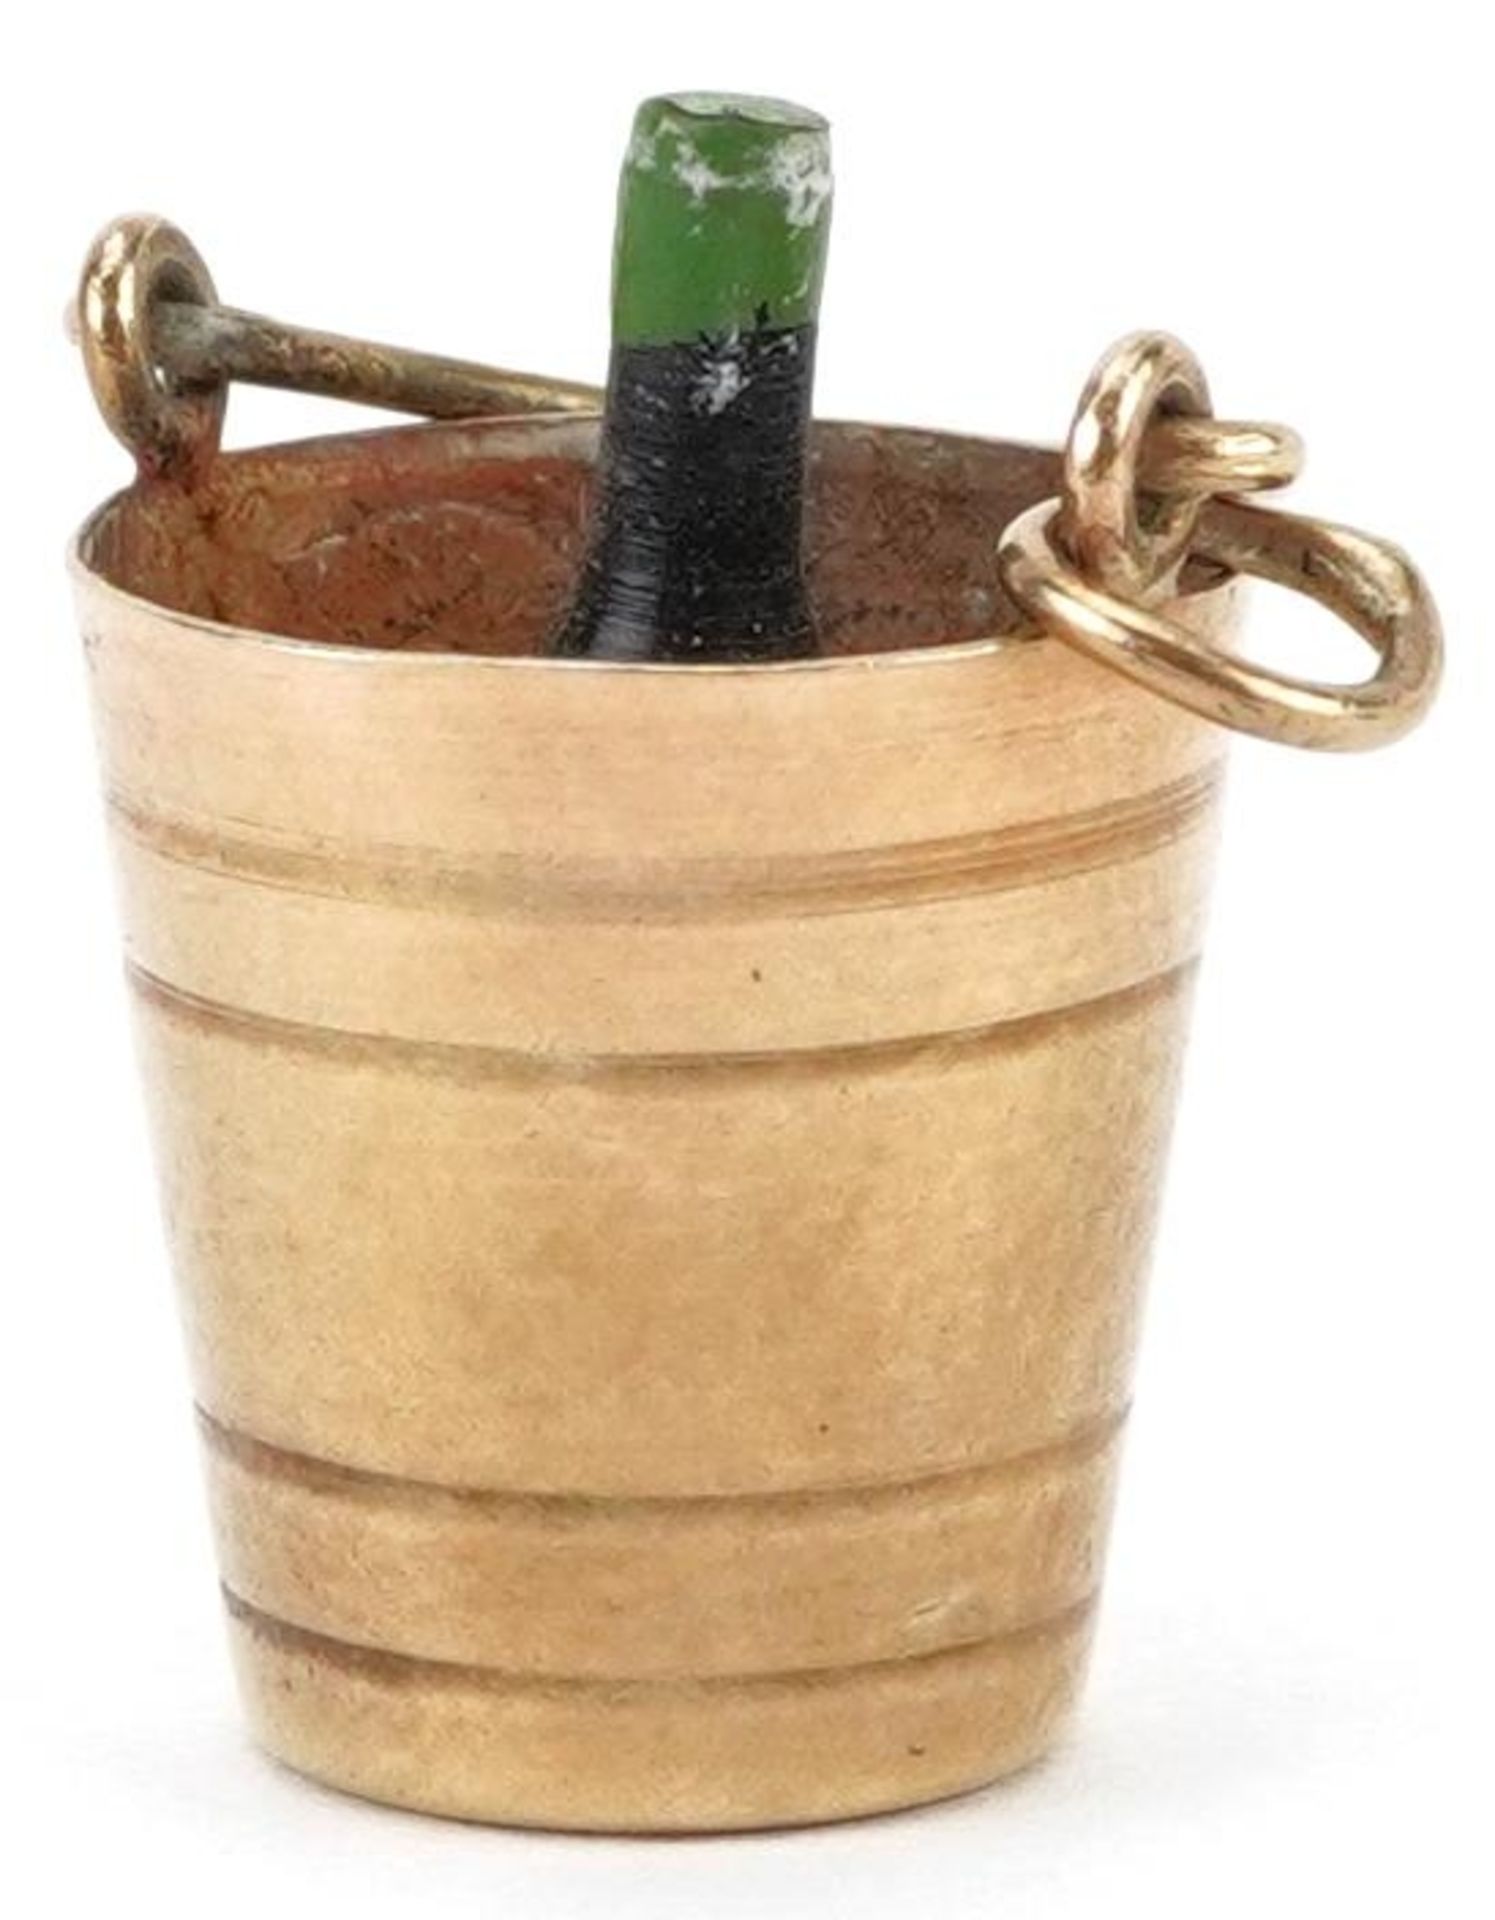 9ct gold charm in the form of a bottle of Champagne in an ice bucket with swing handle, 2.3cm